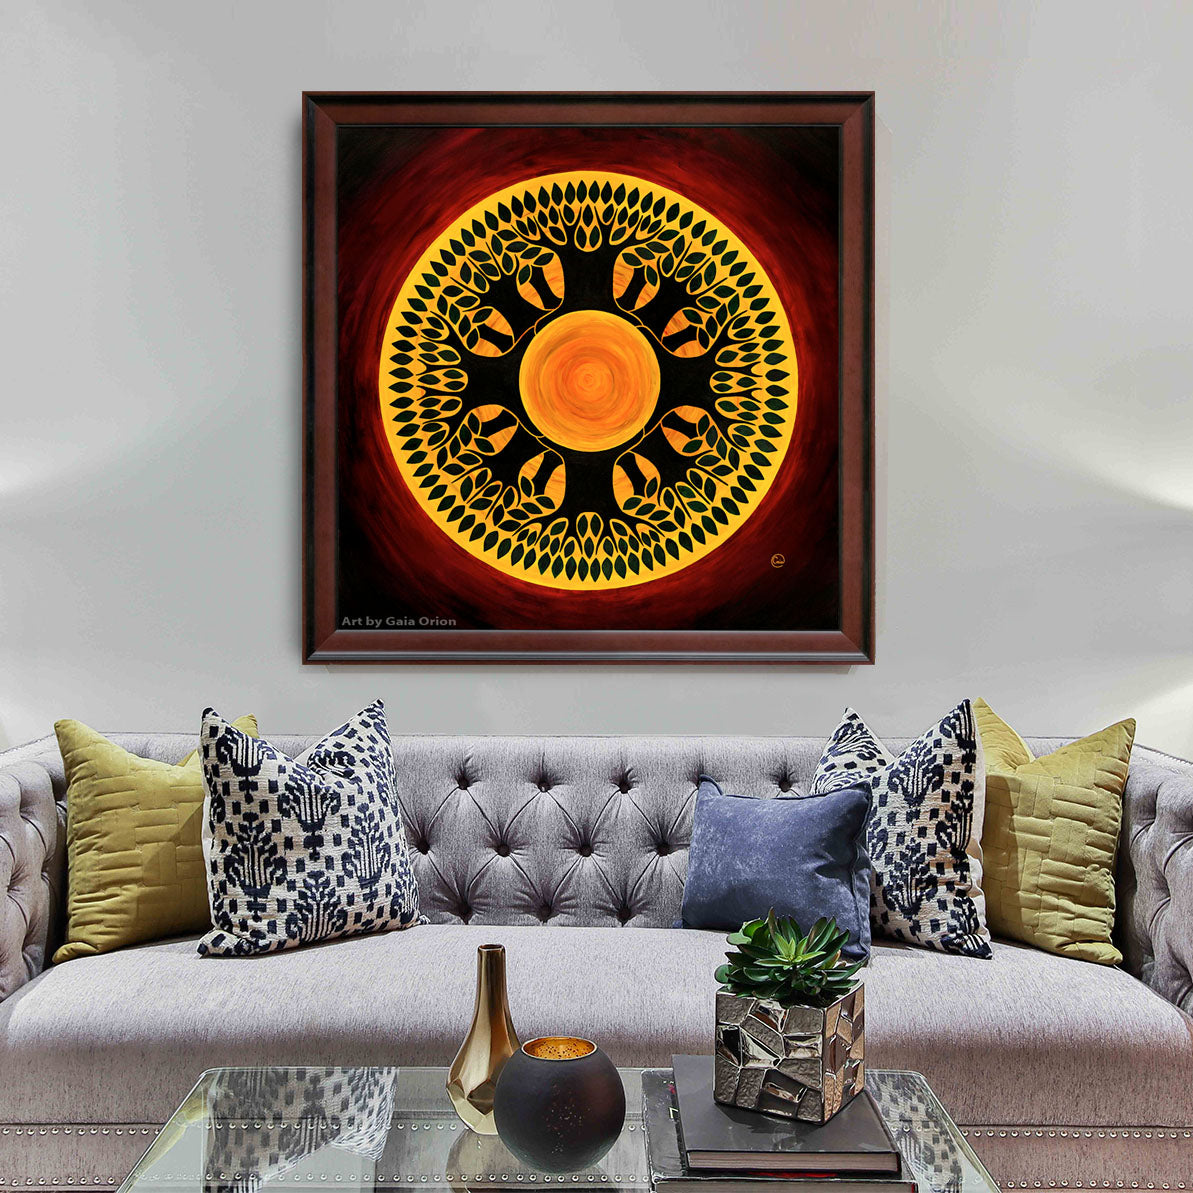 A framed painting of a deep red tree mandala with a yellow sun